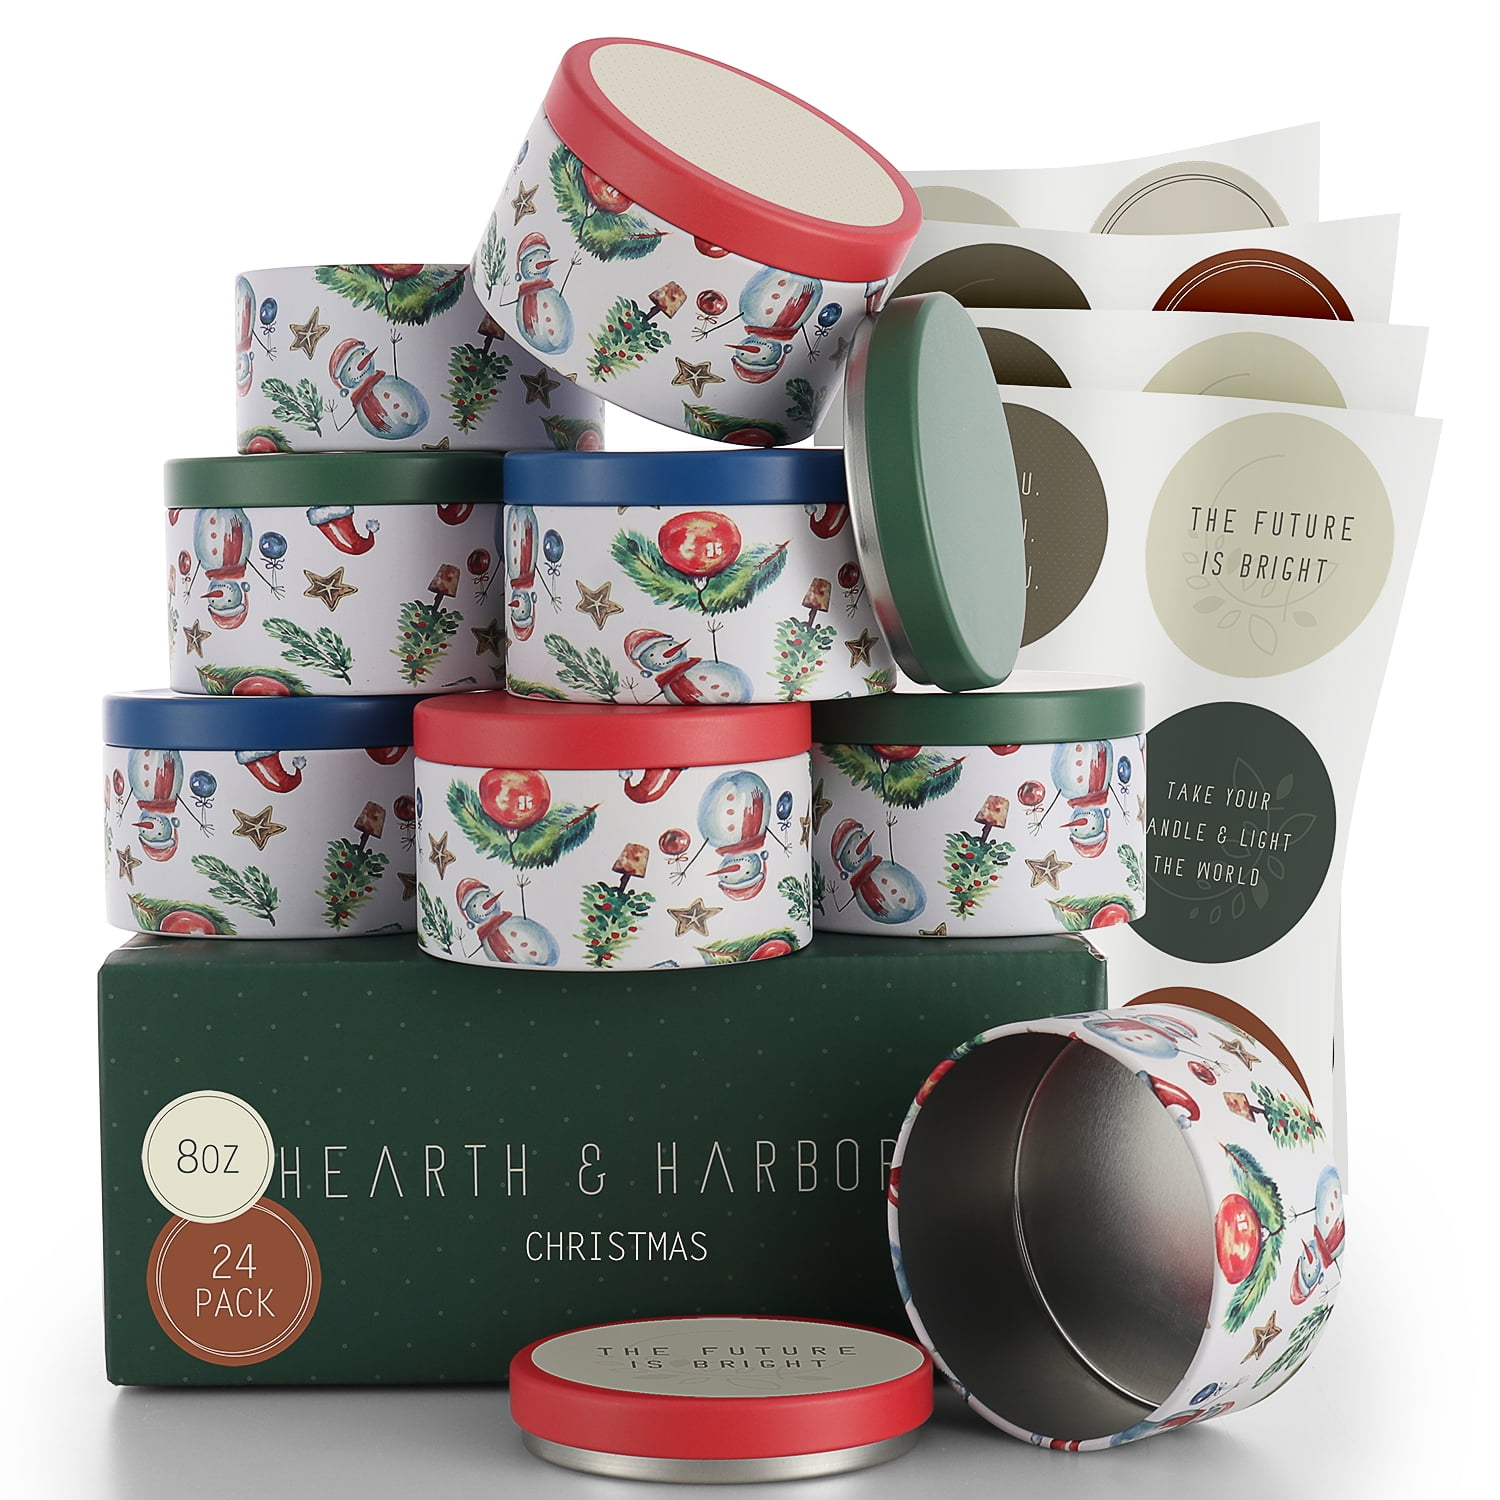 Hearts & Crafts Marble Candle Tins 8 oz with Lids - 24-Pack of Bulk Candle Jars for Making Candles, Arts & Crafts, Storage, G